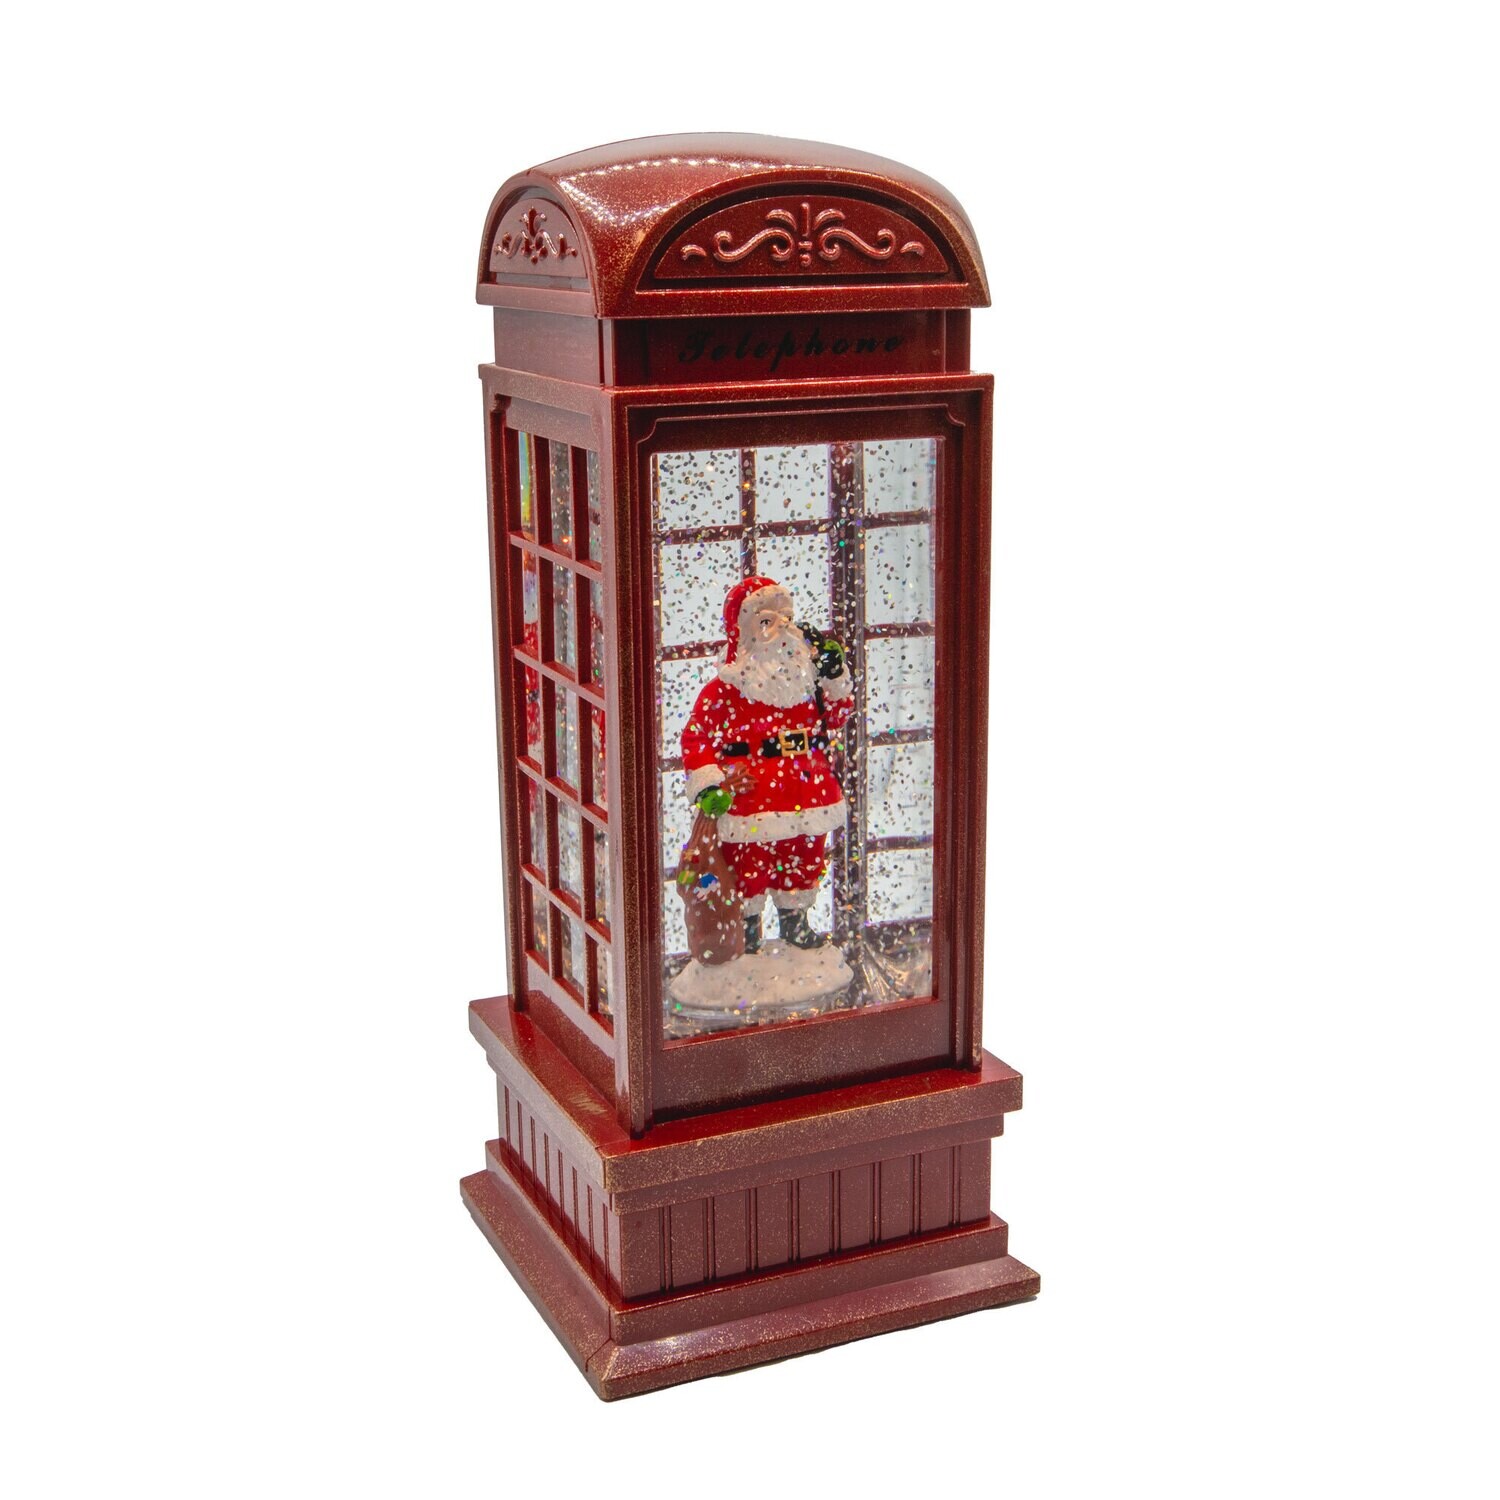 Snow Globe- 10" Red LED Phone Booth with SANTA